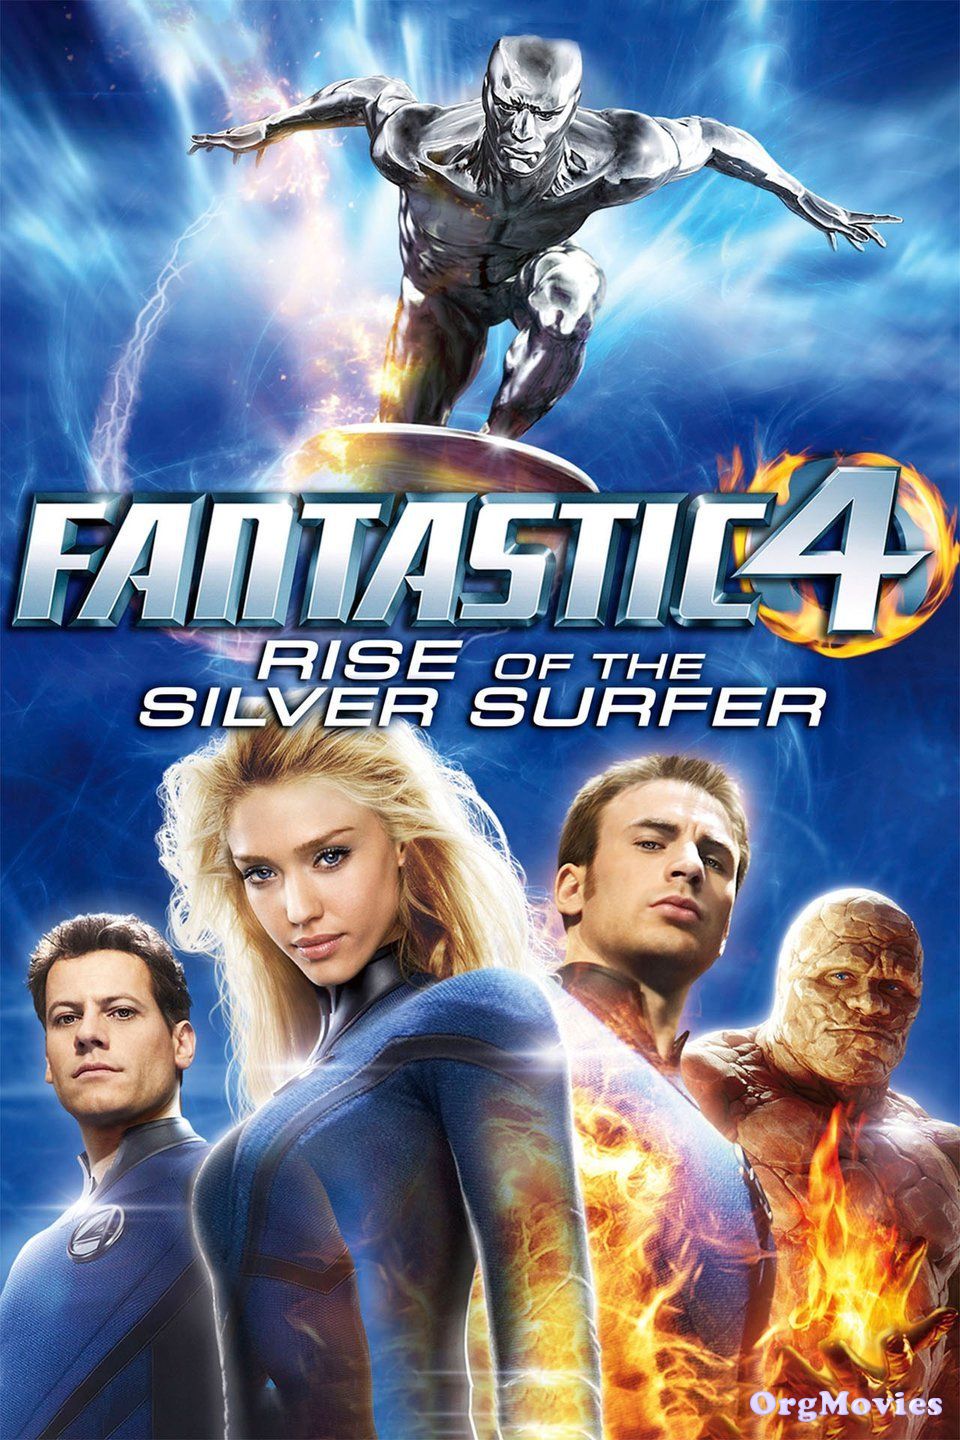 Fantastic 4 Rise of the Silver Surfer 2007 Hindi Dubbed Full Movie download full movie